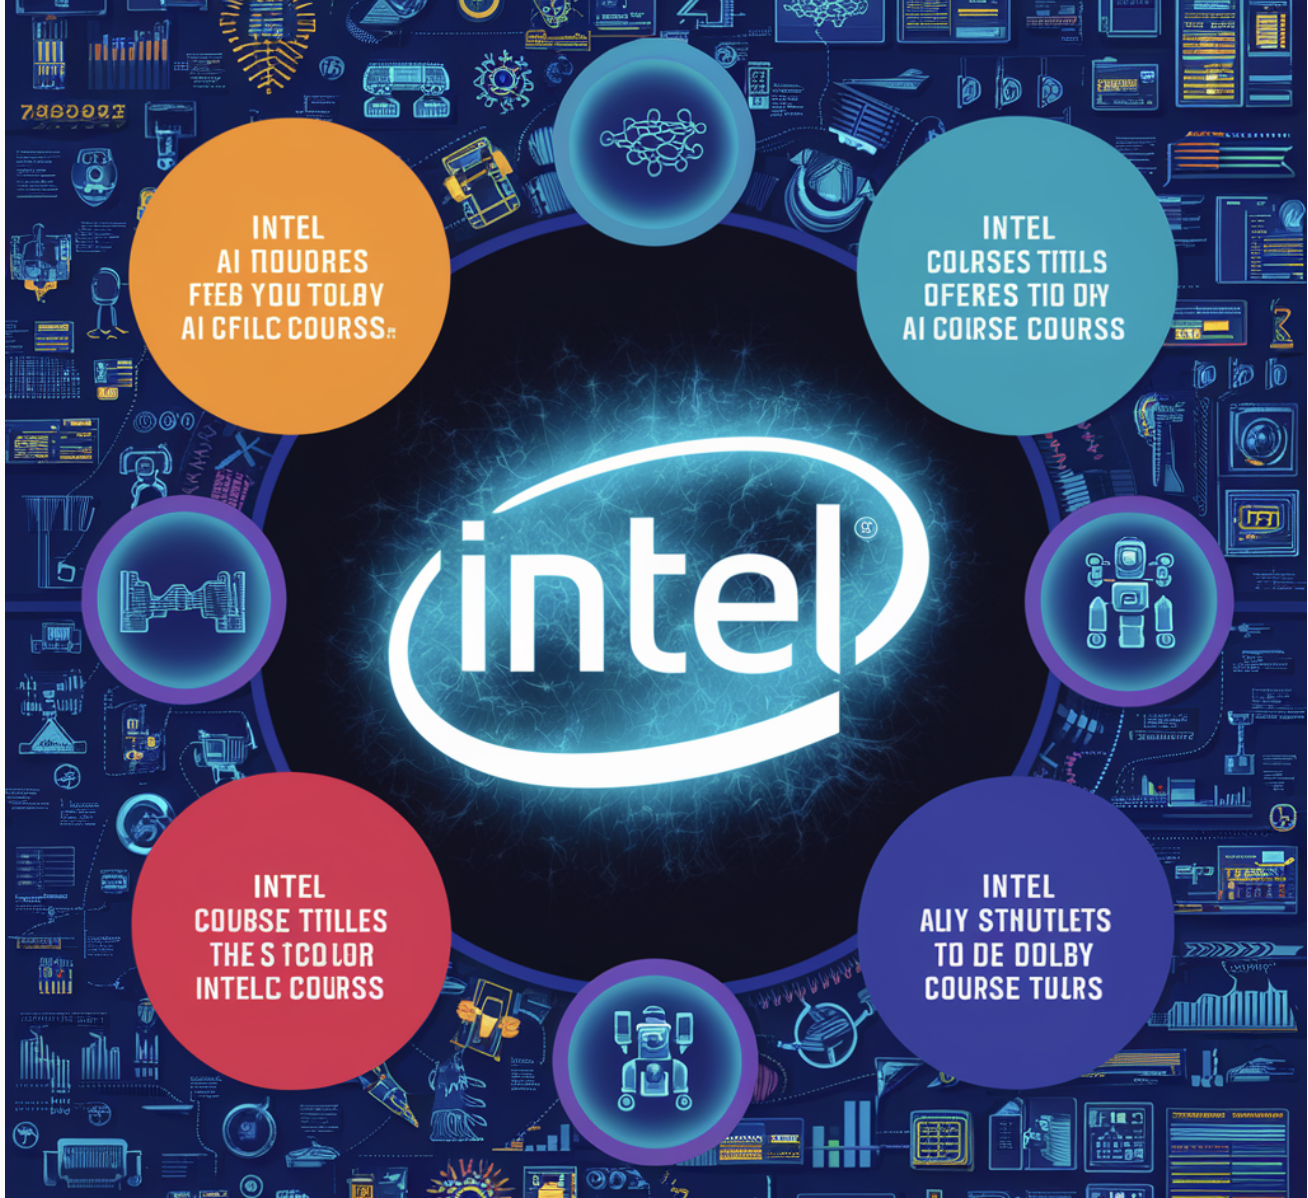  Top AI Courses Offered by Intel